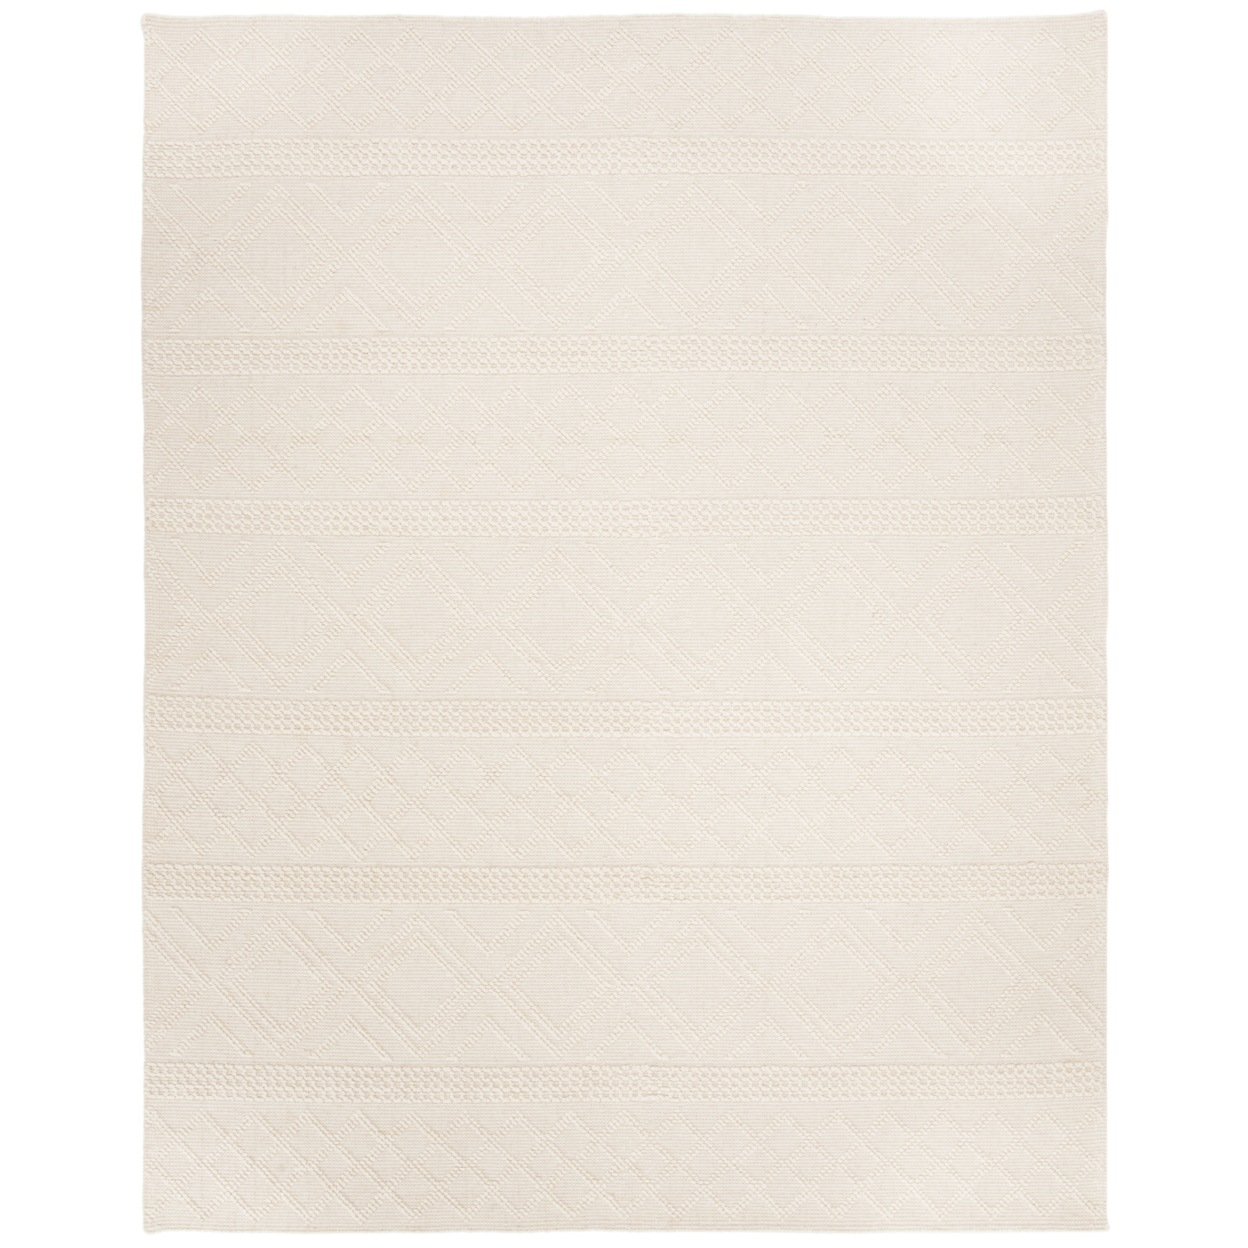 SAFAVIEH Vermont Collection VRM211A Handwoven Ivory Rug - 6 X 9